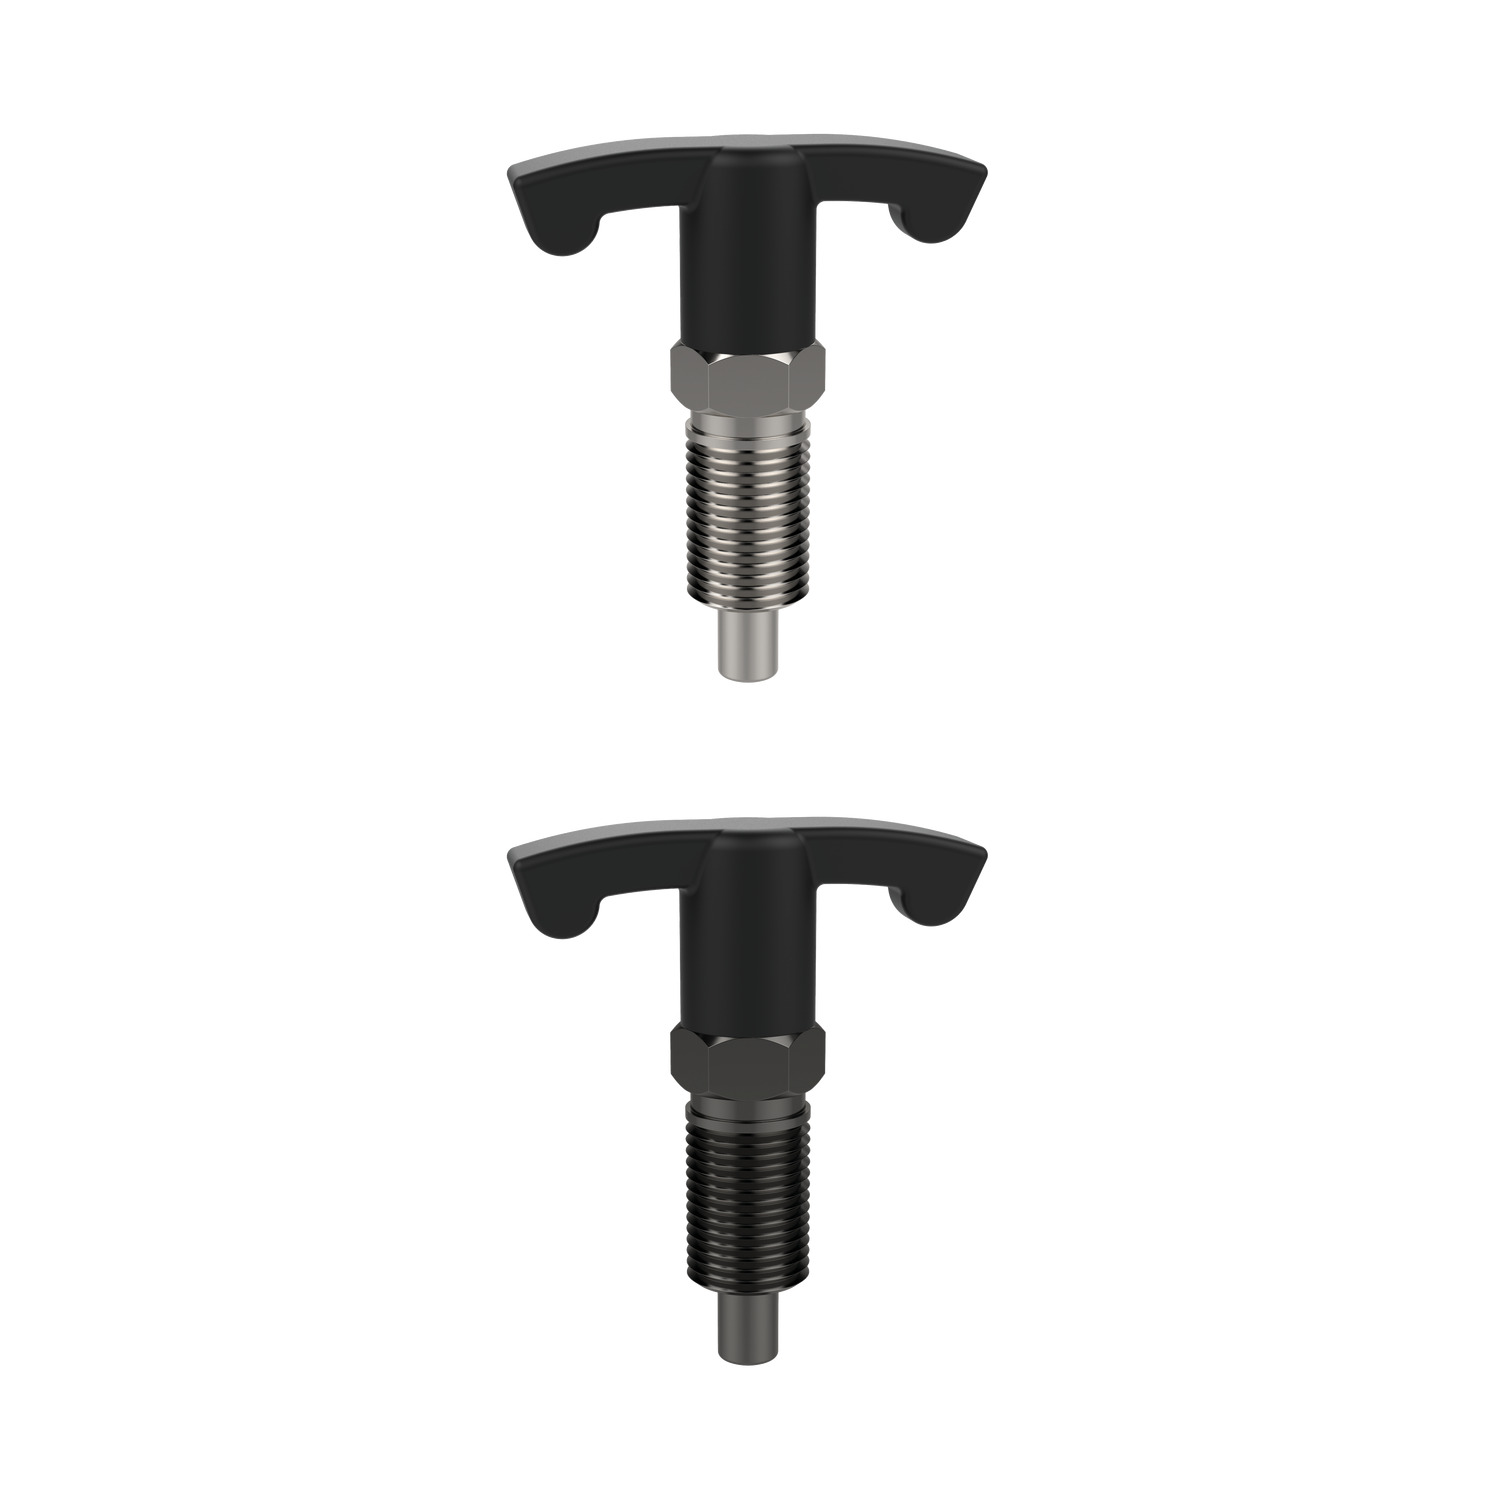 Product 32502, Index Plungers - T-handle Grip compact - non locking / 